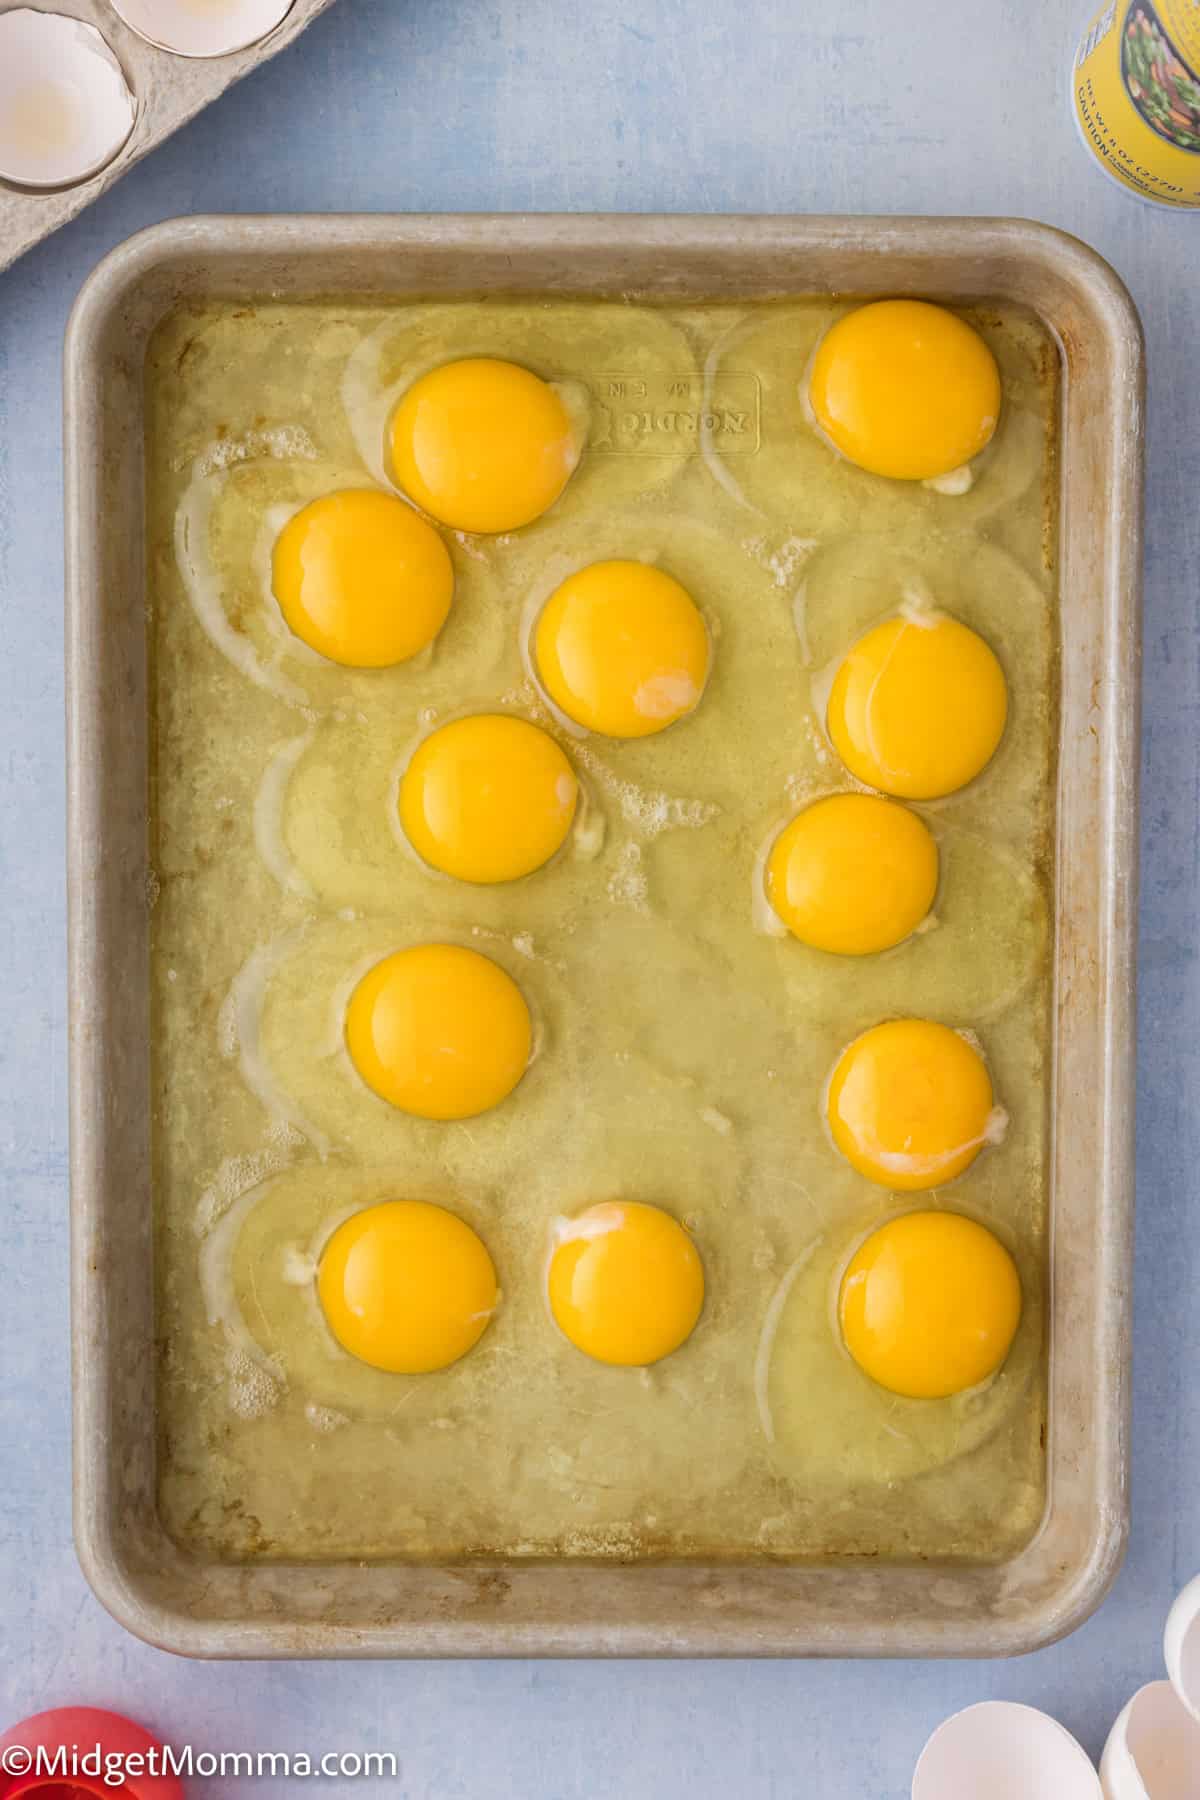 A rectangular baking pan contains a dozen raw egg yolks on top of a partially mixed egg white mixture. Eggshells are visible in the top left corner.